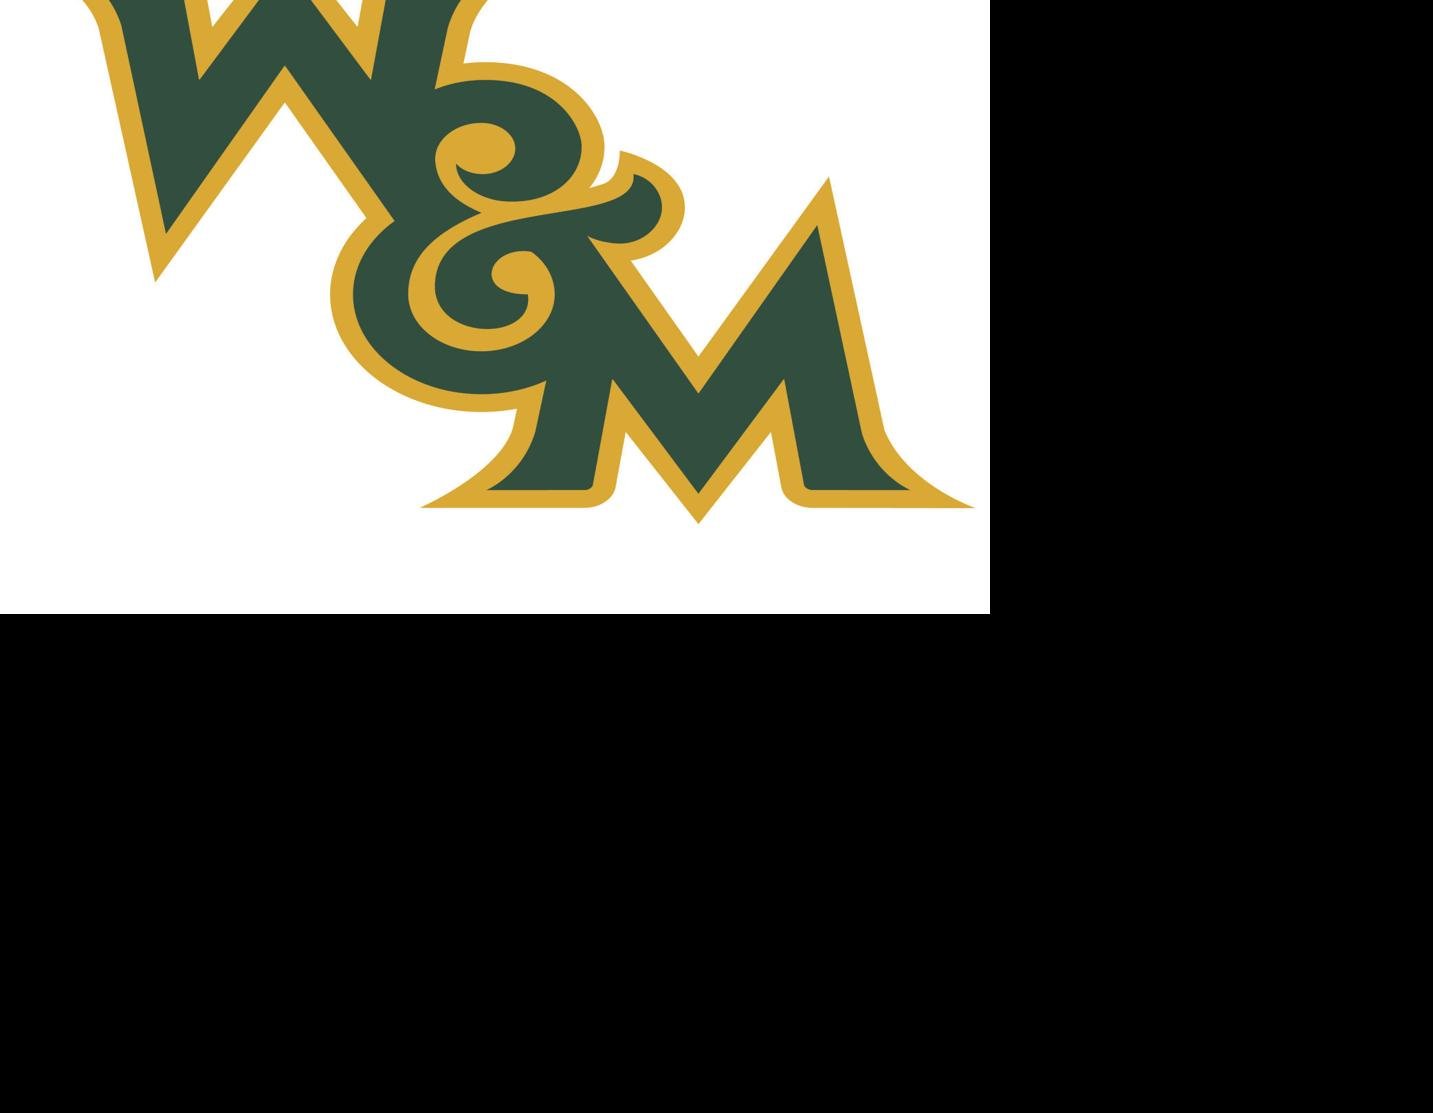 William & Mary, entering 125th football season, introduces new